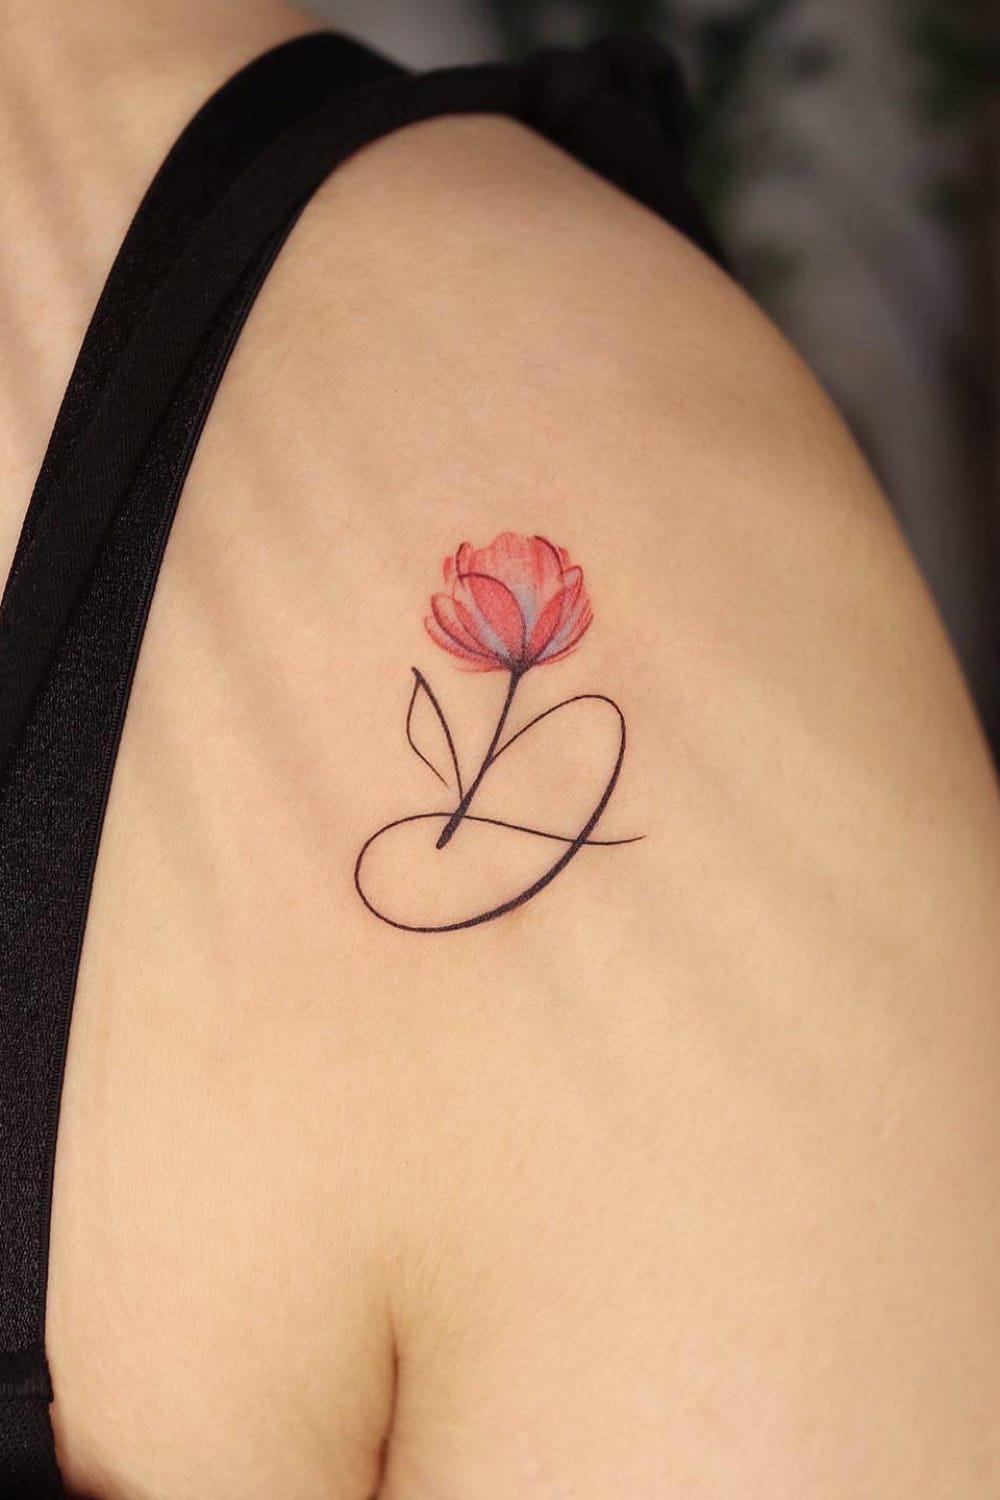 Small flower tattoo with letter